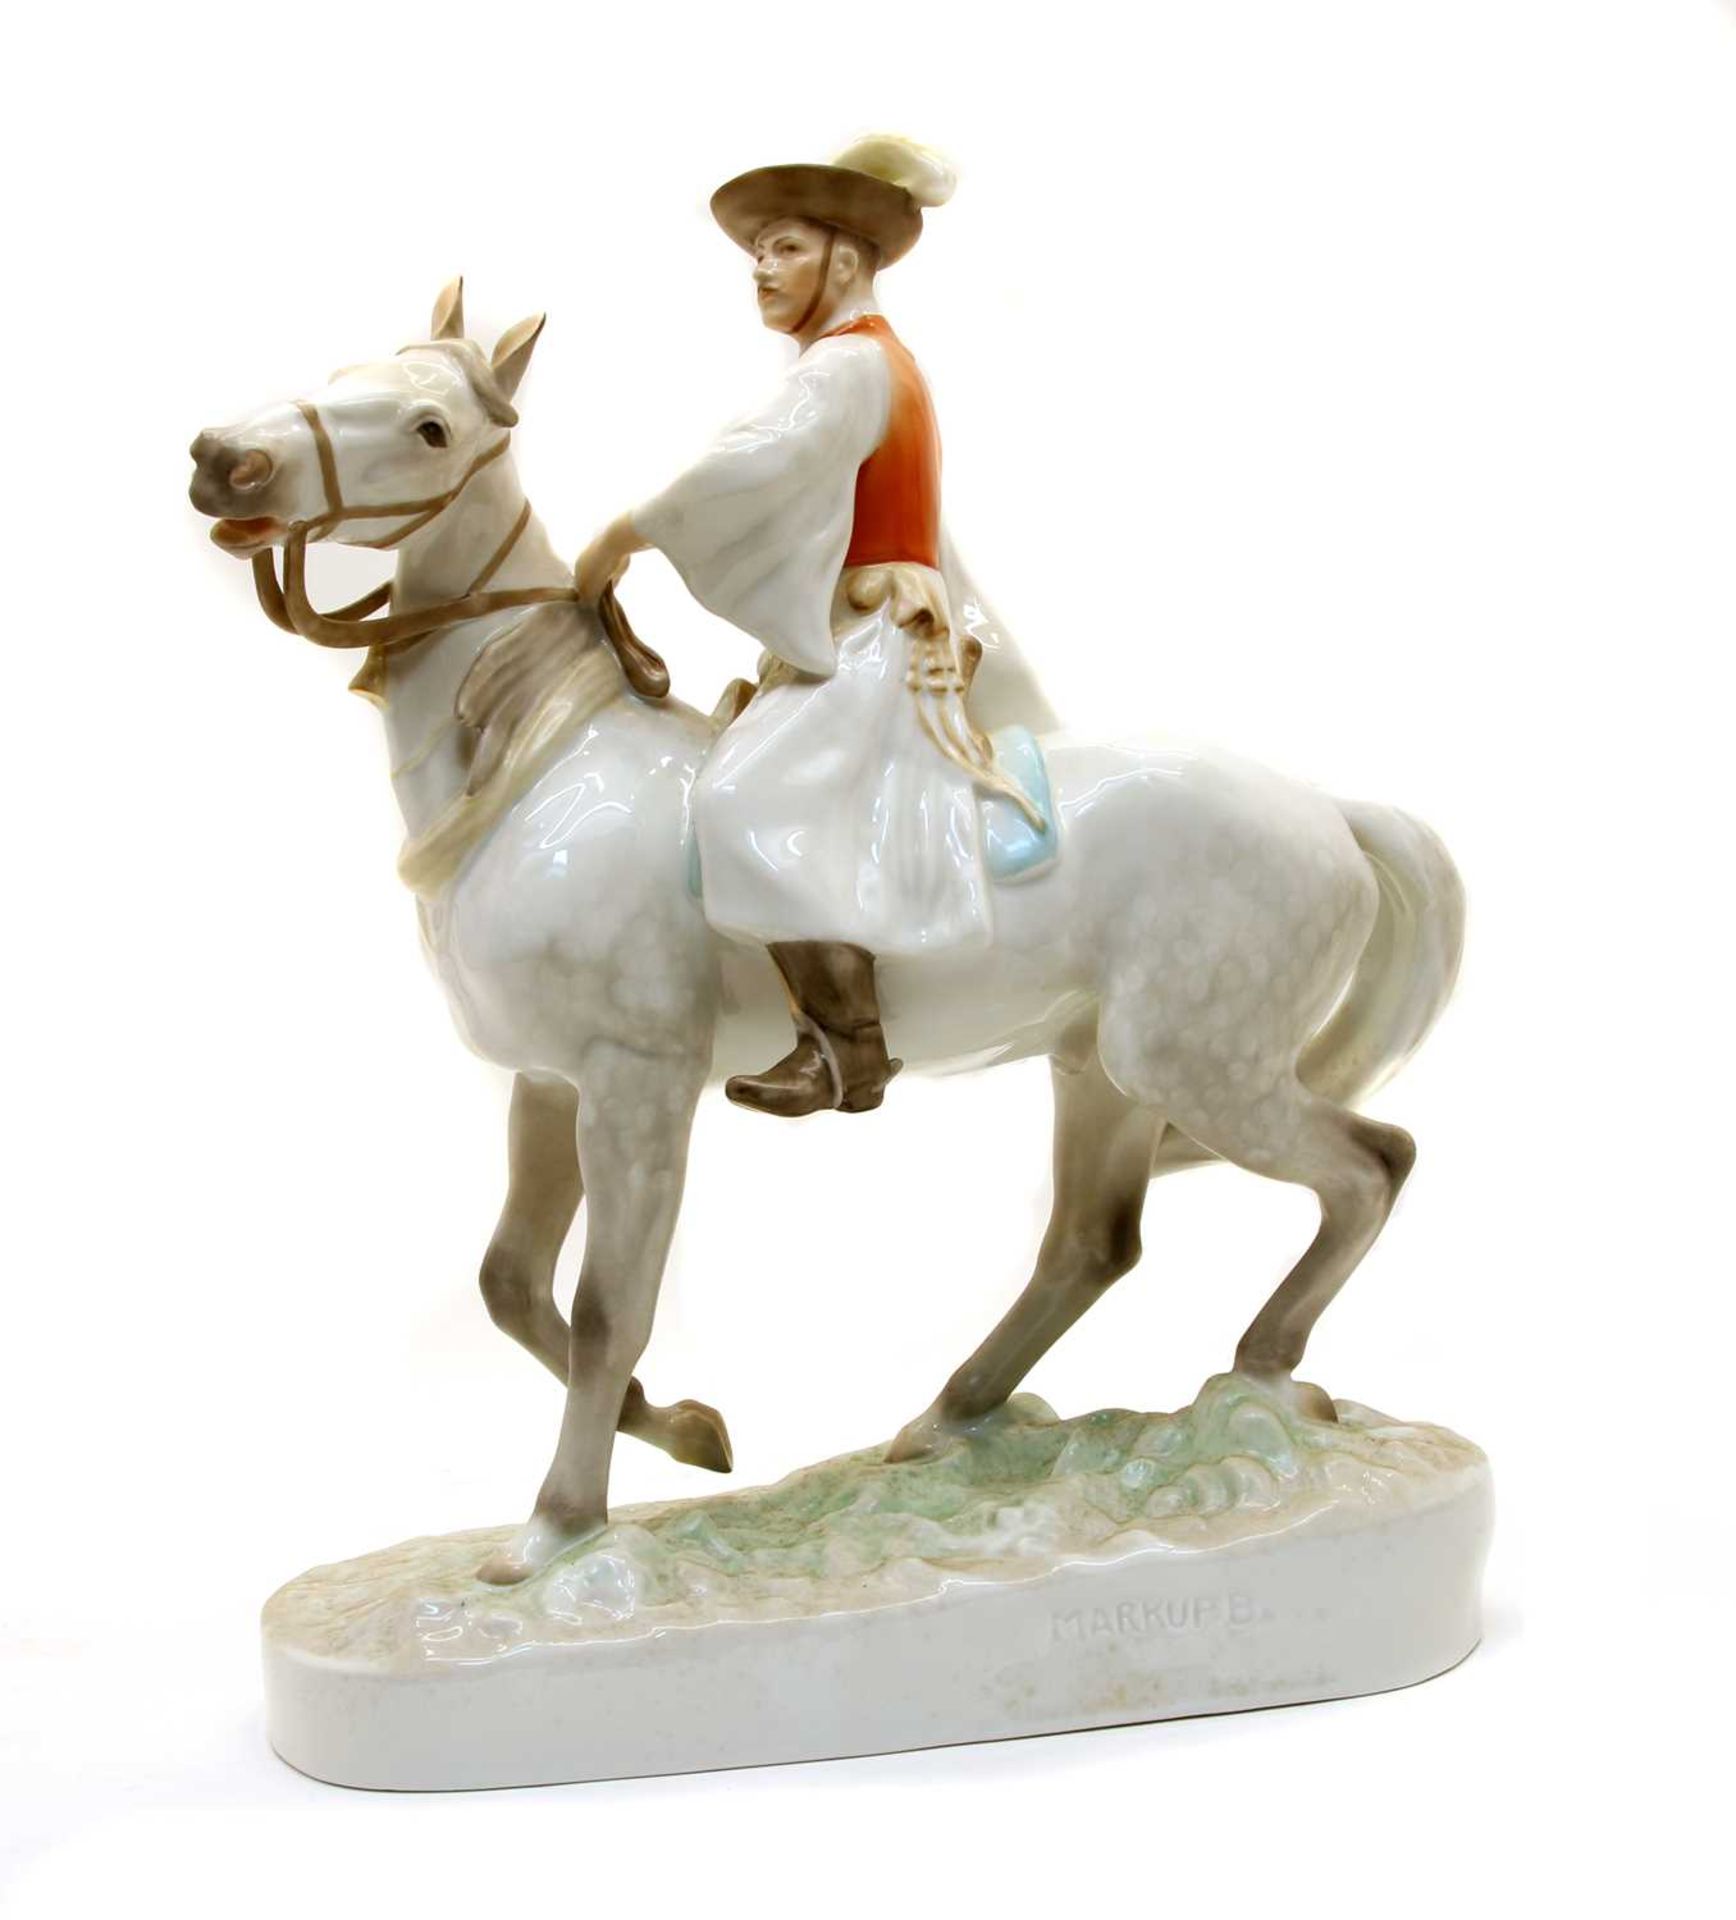 A large Hungarian Herend porcelain figure